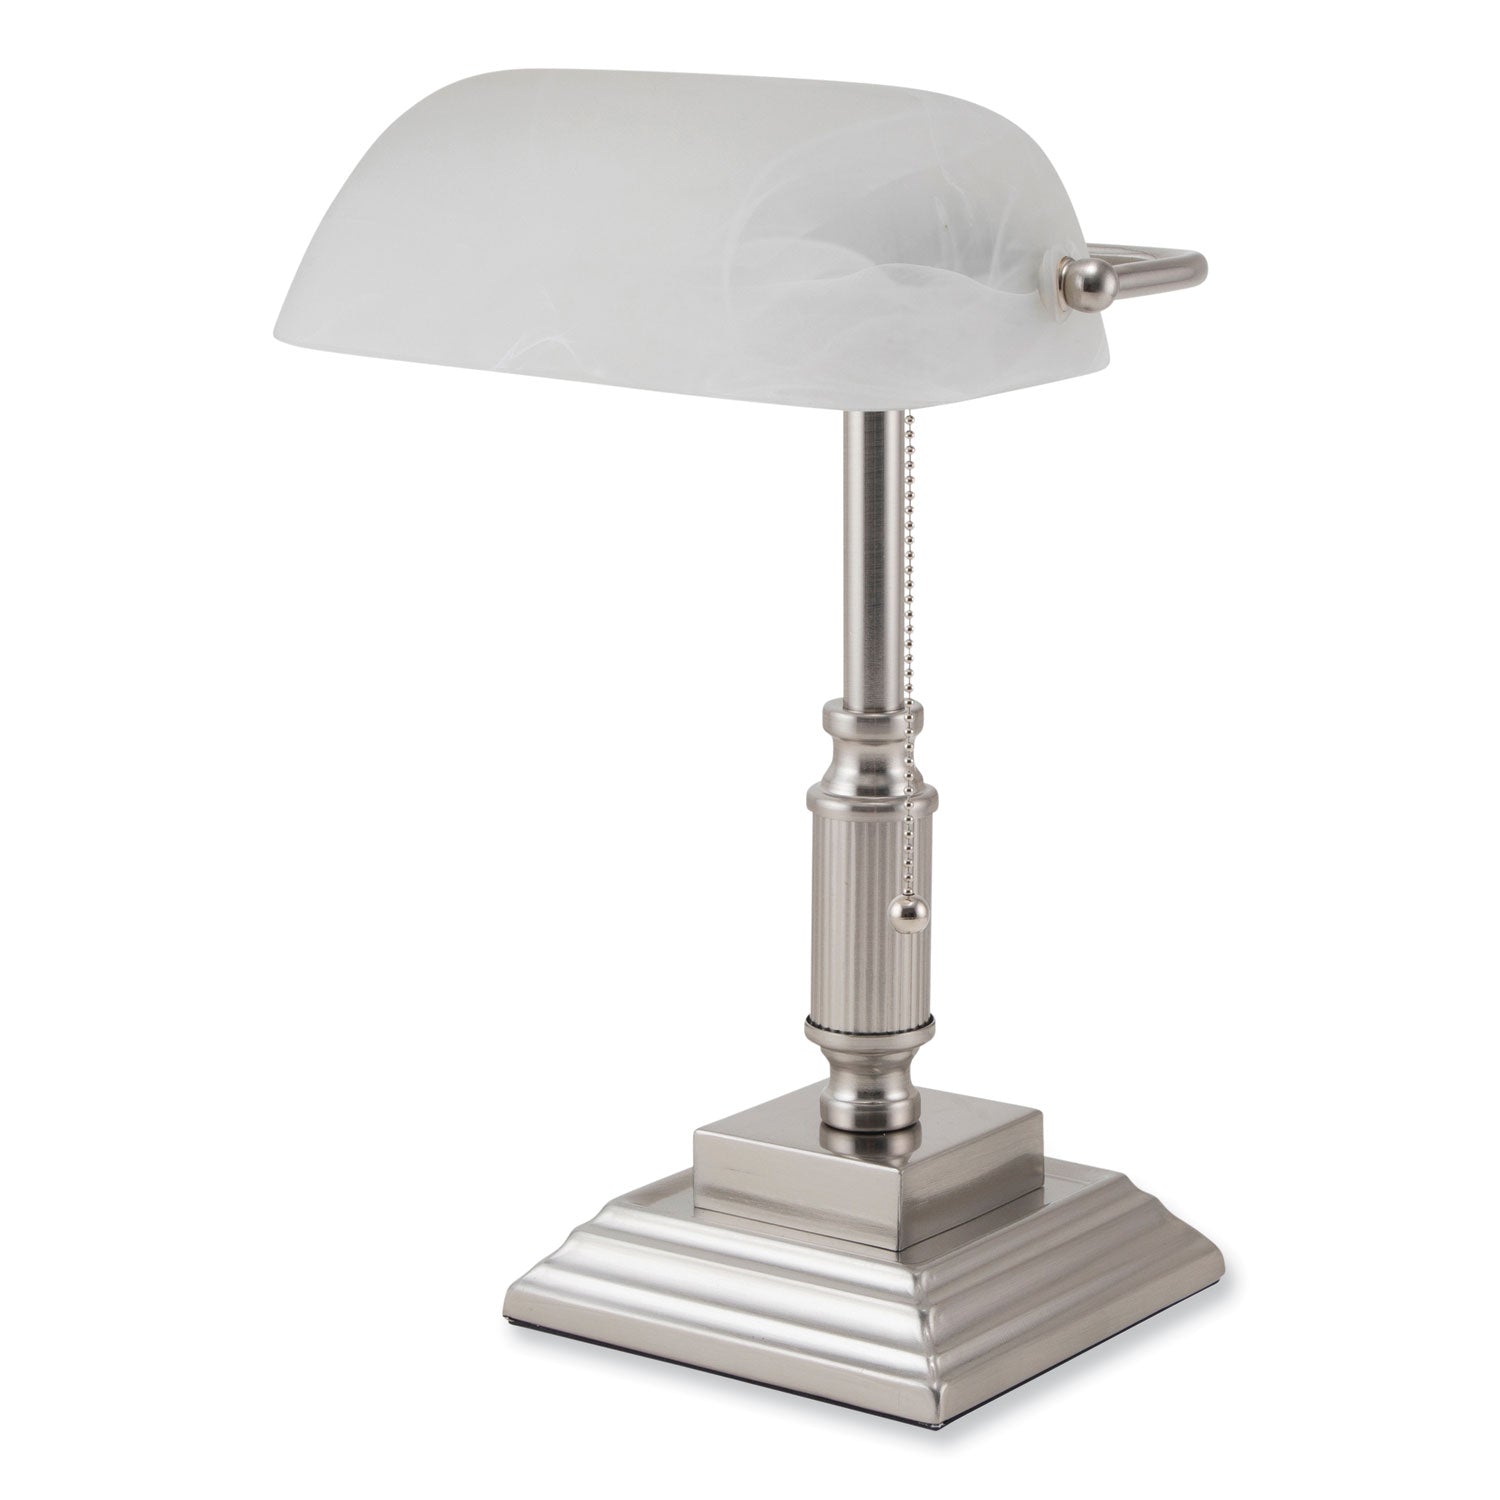 led-bankers-lamp-with-frosted-shade-1475-high-brushed-nickel-ships-in-4-6-business-days_vlu8vs688029bn - 4